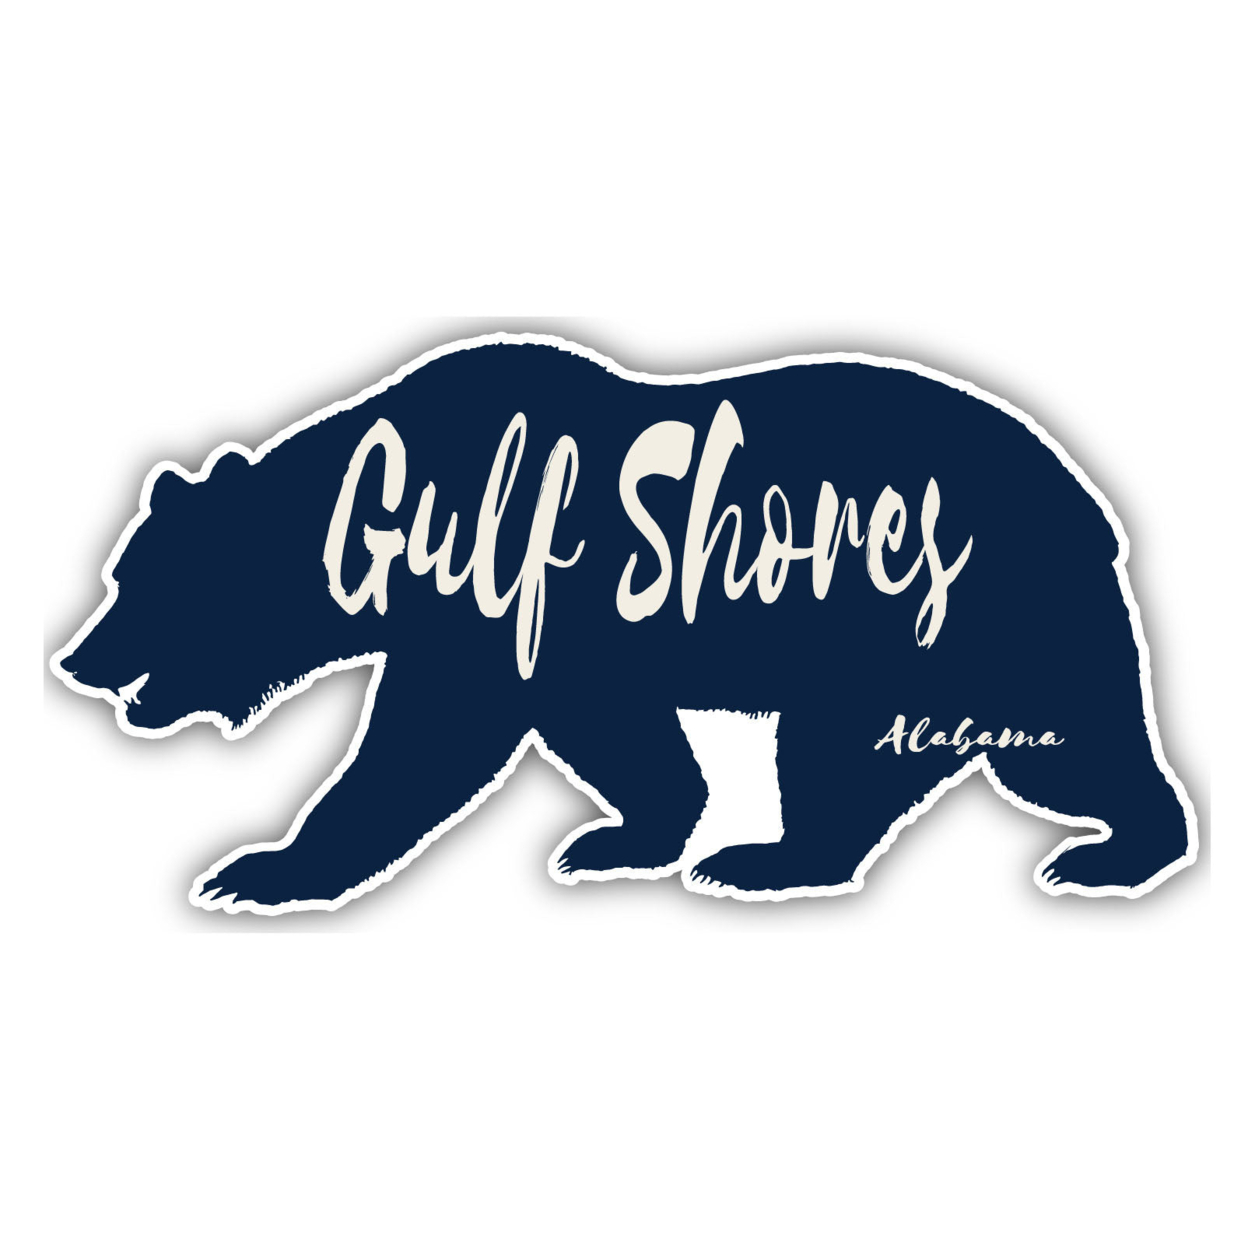 Gulf Shores Alabama Souvenir Decorative Stickers (Choose Theme And Size) - 4-Pack, 10-Inch, Bear